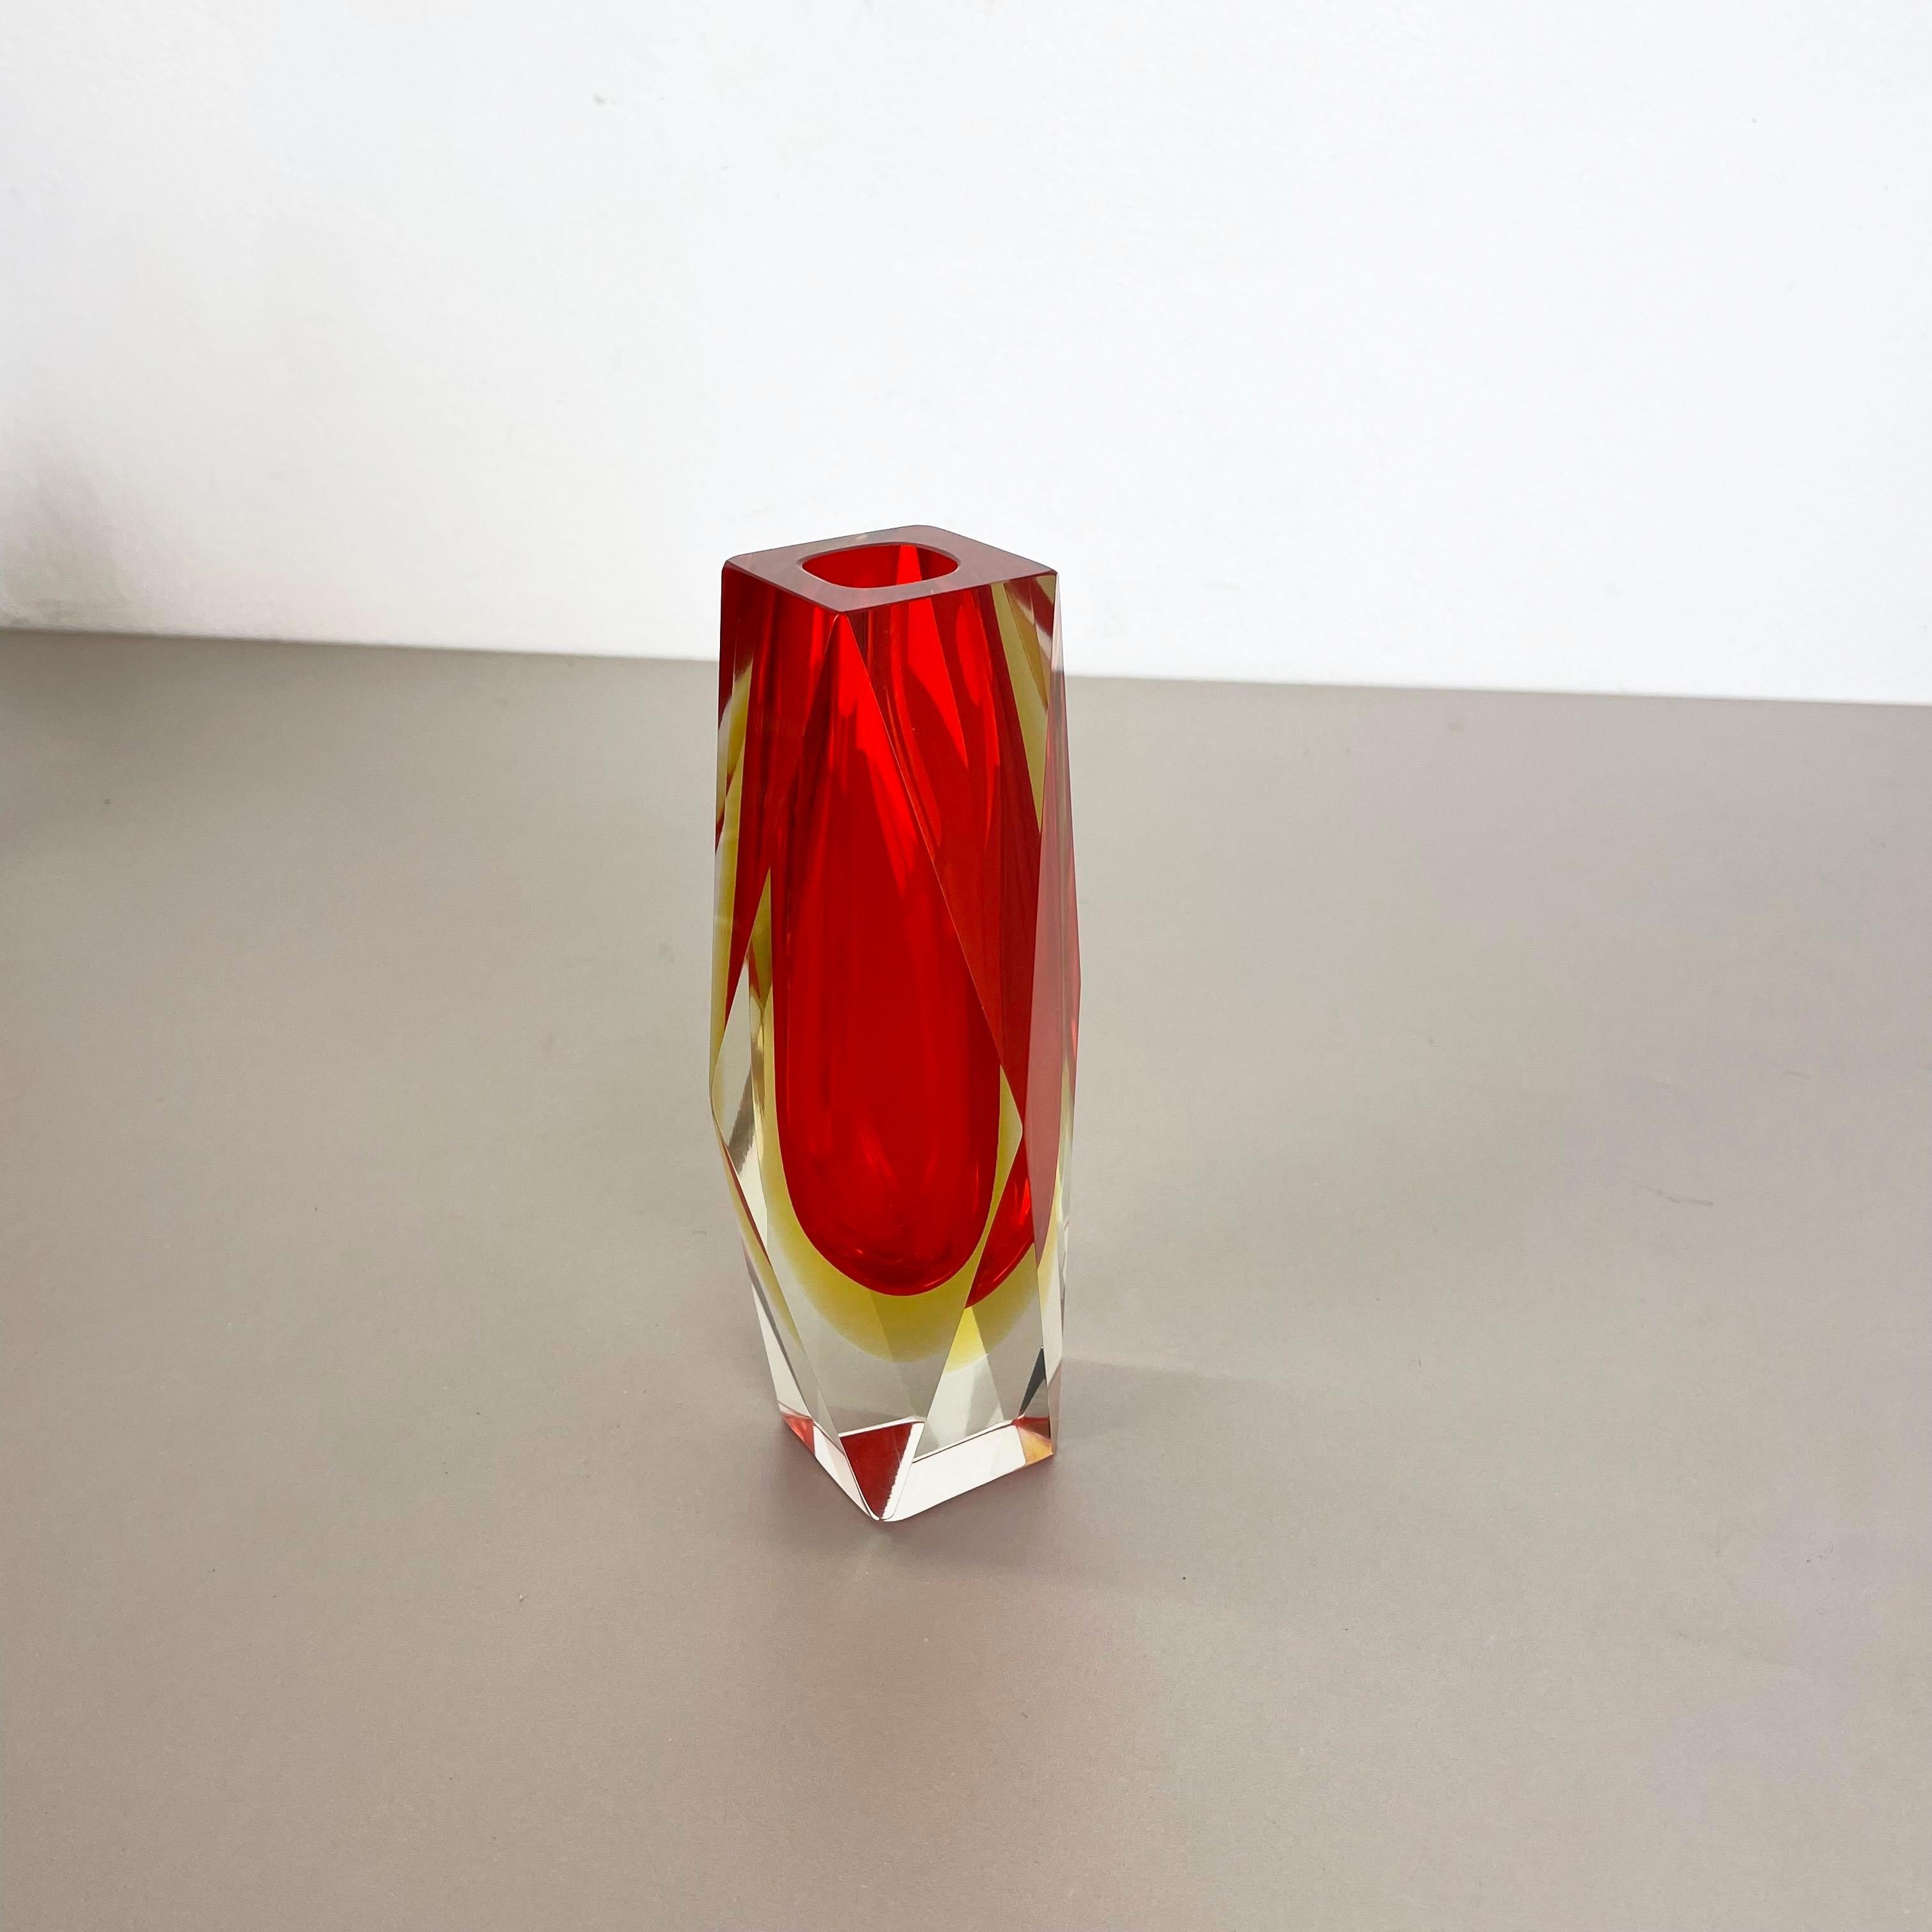 Italian Large Red Murano Glass Sommerso Vase by Flavio Poli Attributed, Italy 1970s For Sale